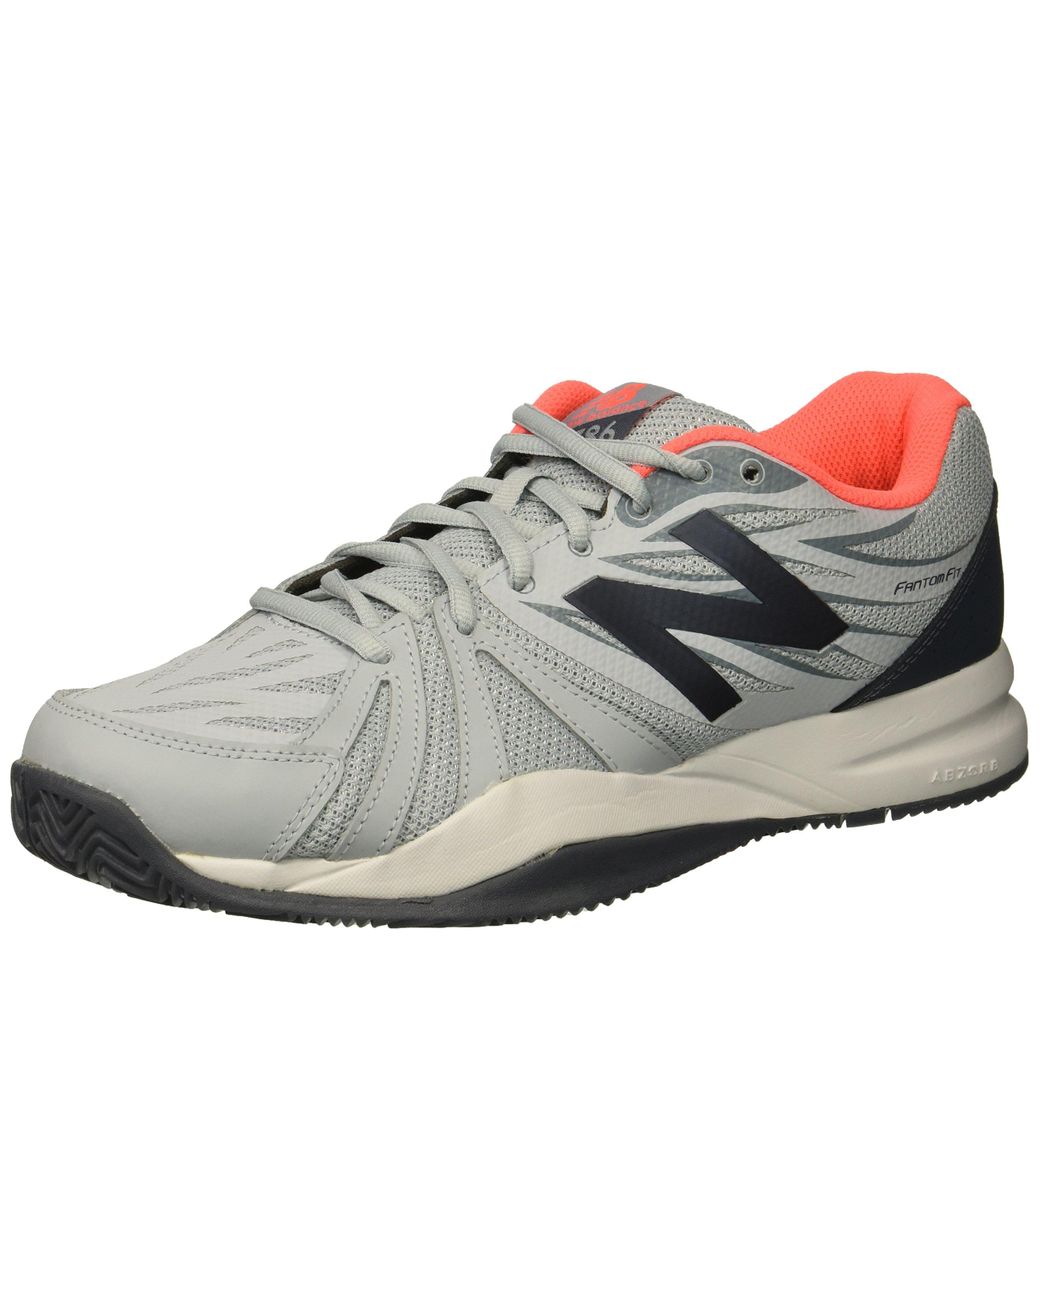 New Balance 786 V2 Hard Court Tennis Shoe in Grey (Gray) - Save 7% - Lyst